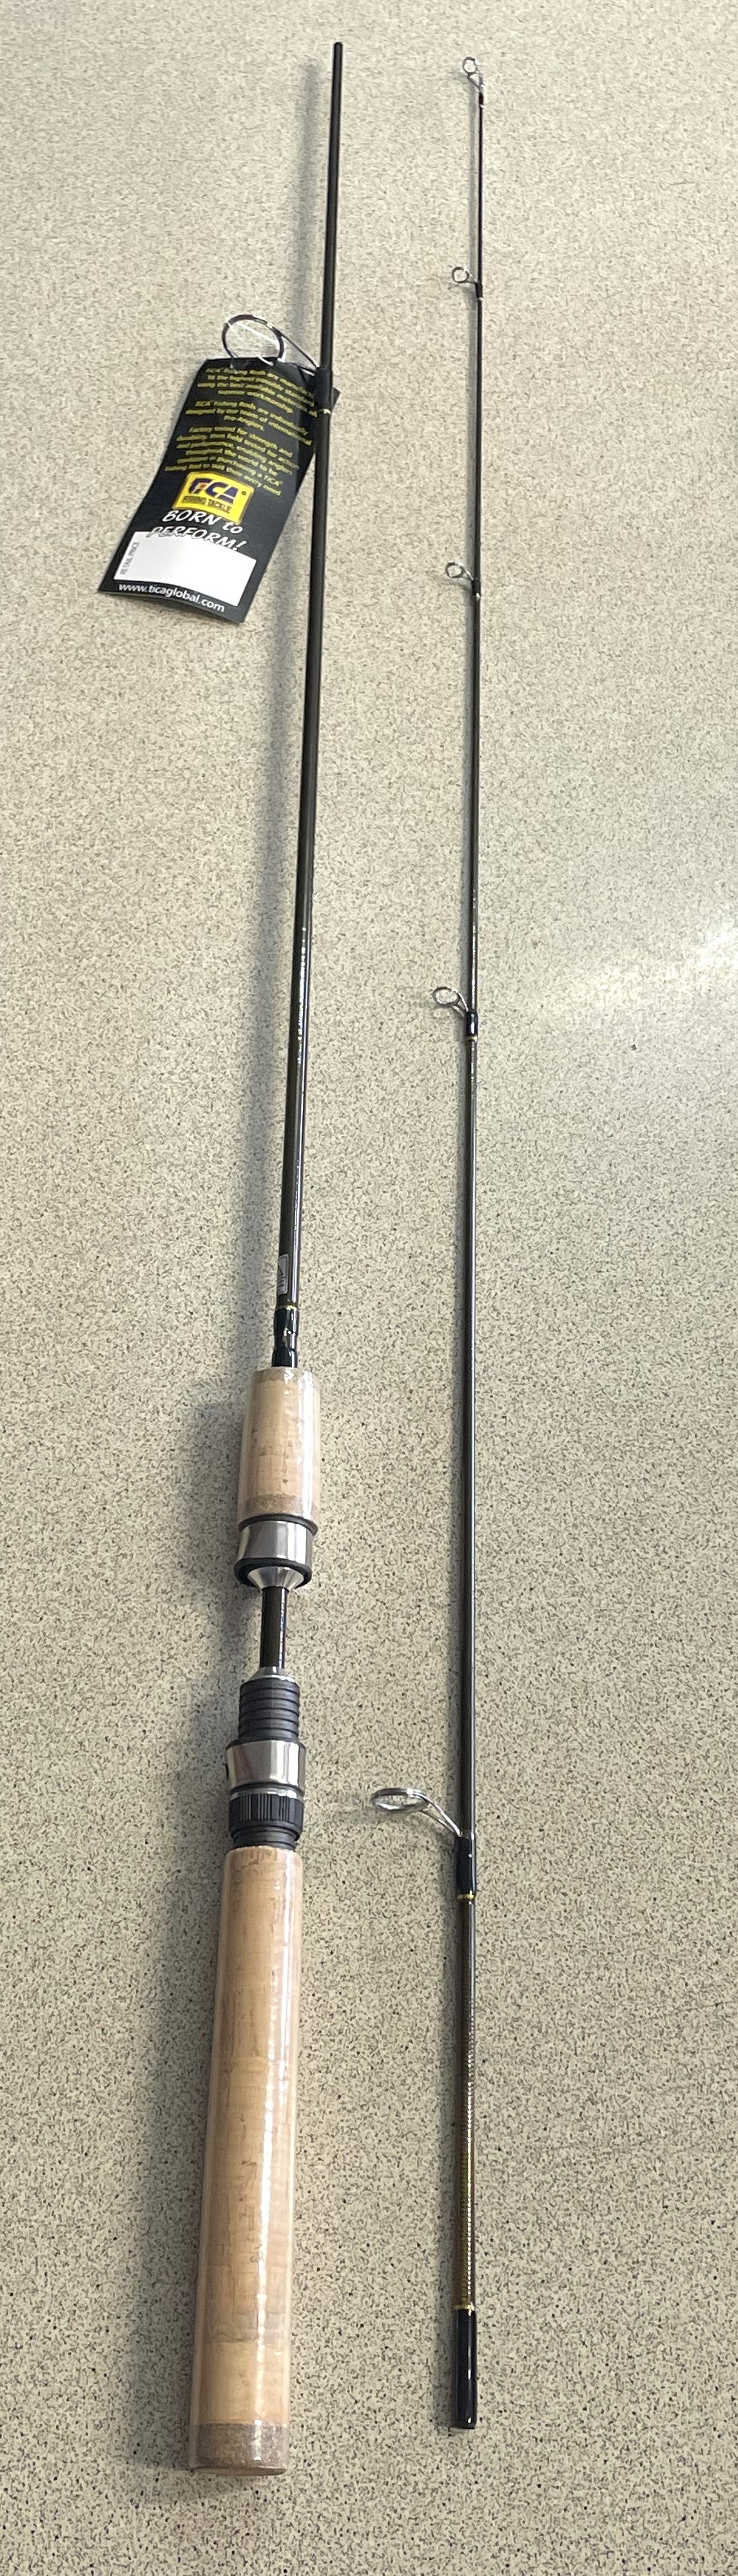 TiCA Spinfocus Spin Rod - 5'6 4-8lb – Trophy Trout Lures and Fly Fishing